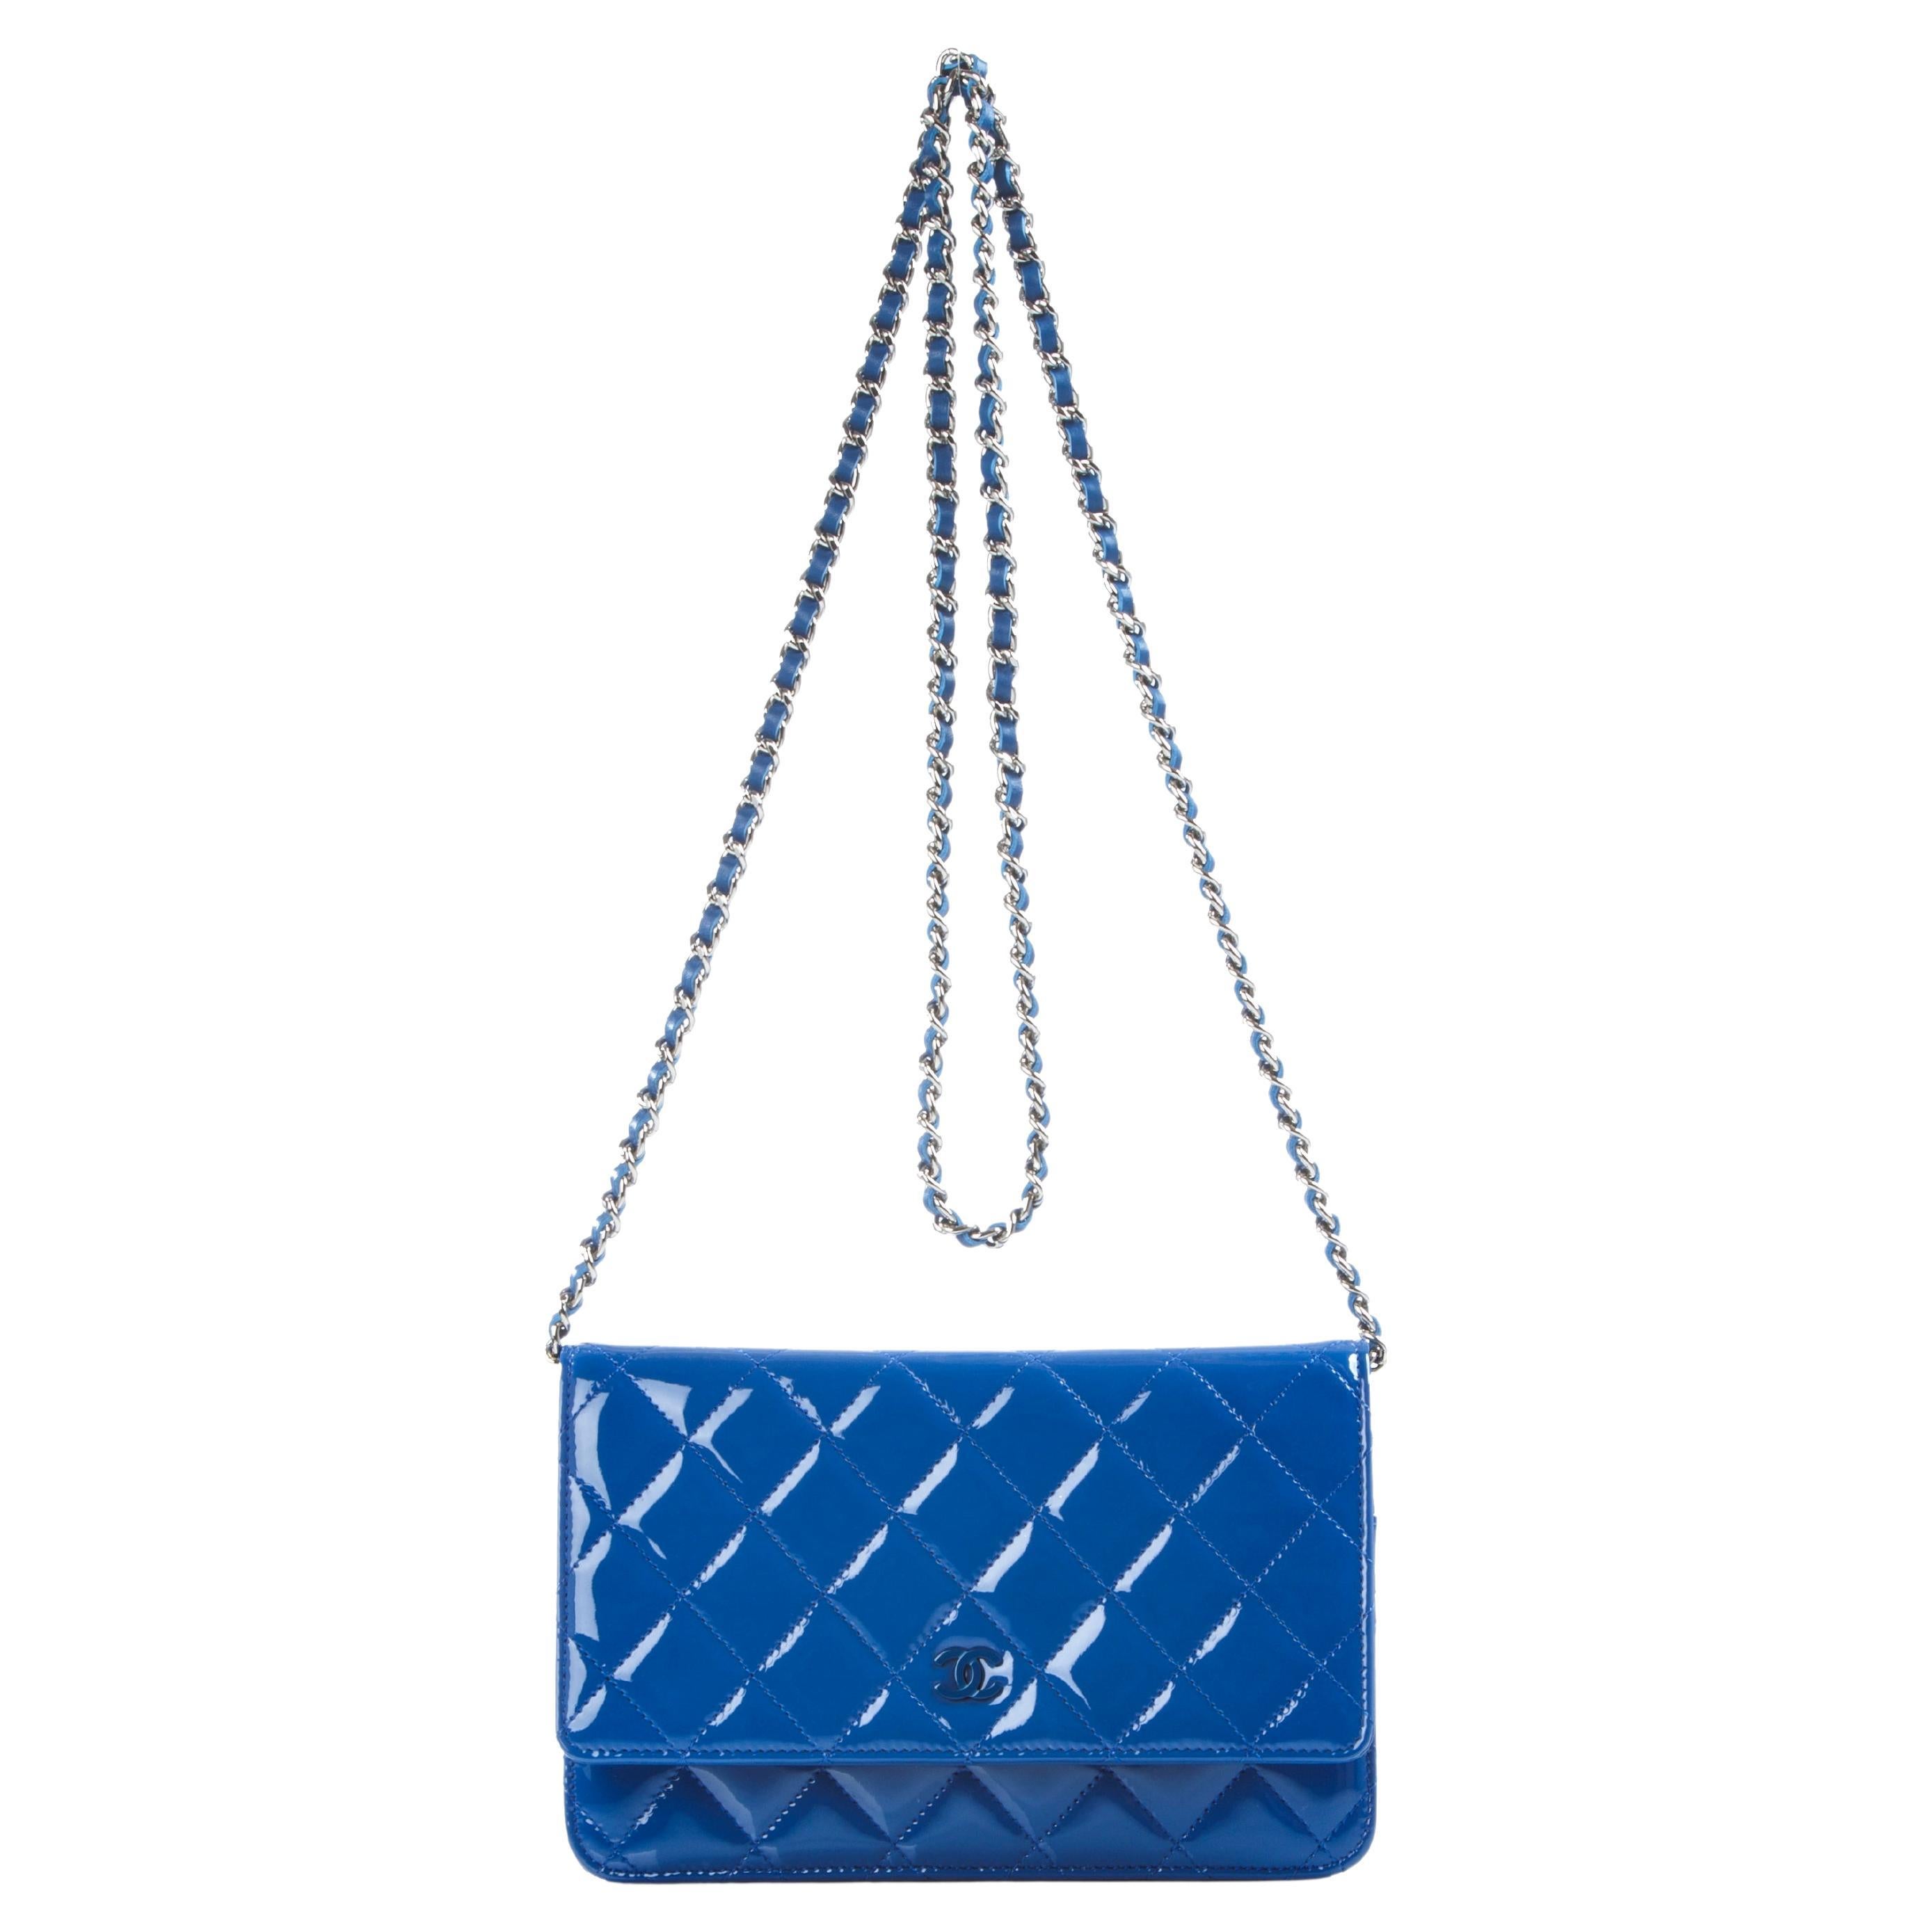 Chanel Rare Royal Blue Patent Leather WOC Crossbody Pristine

Year: 2014  
So blue plated hardware
Interior zippered pocket on flap
Interior 6 card slot
Interior large centered zipper pocket
Additional large interior pocket
Blue lambskin